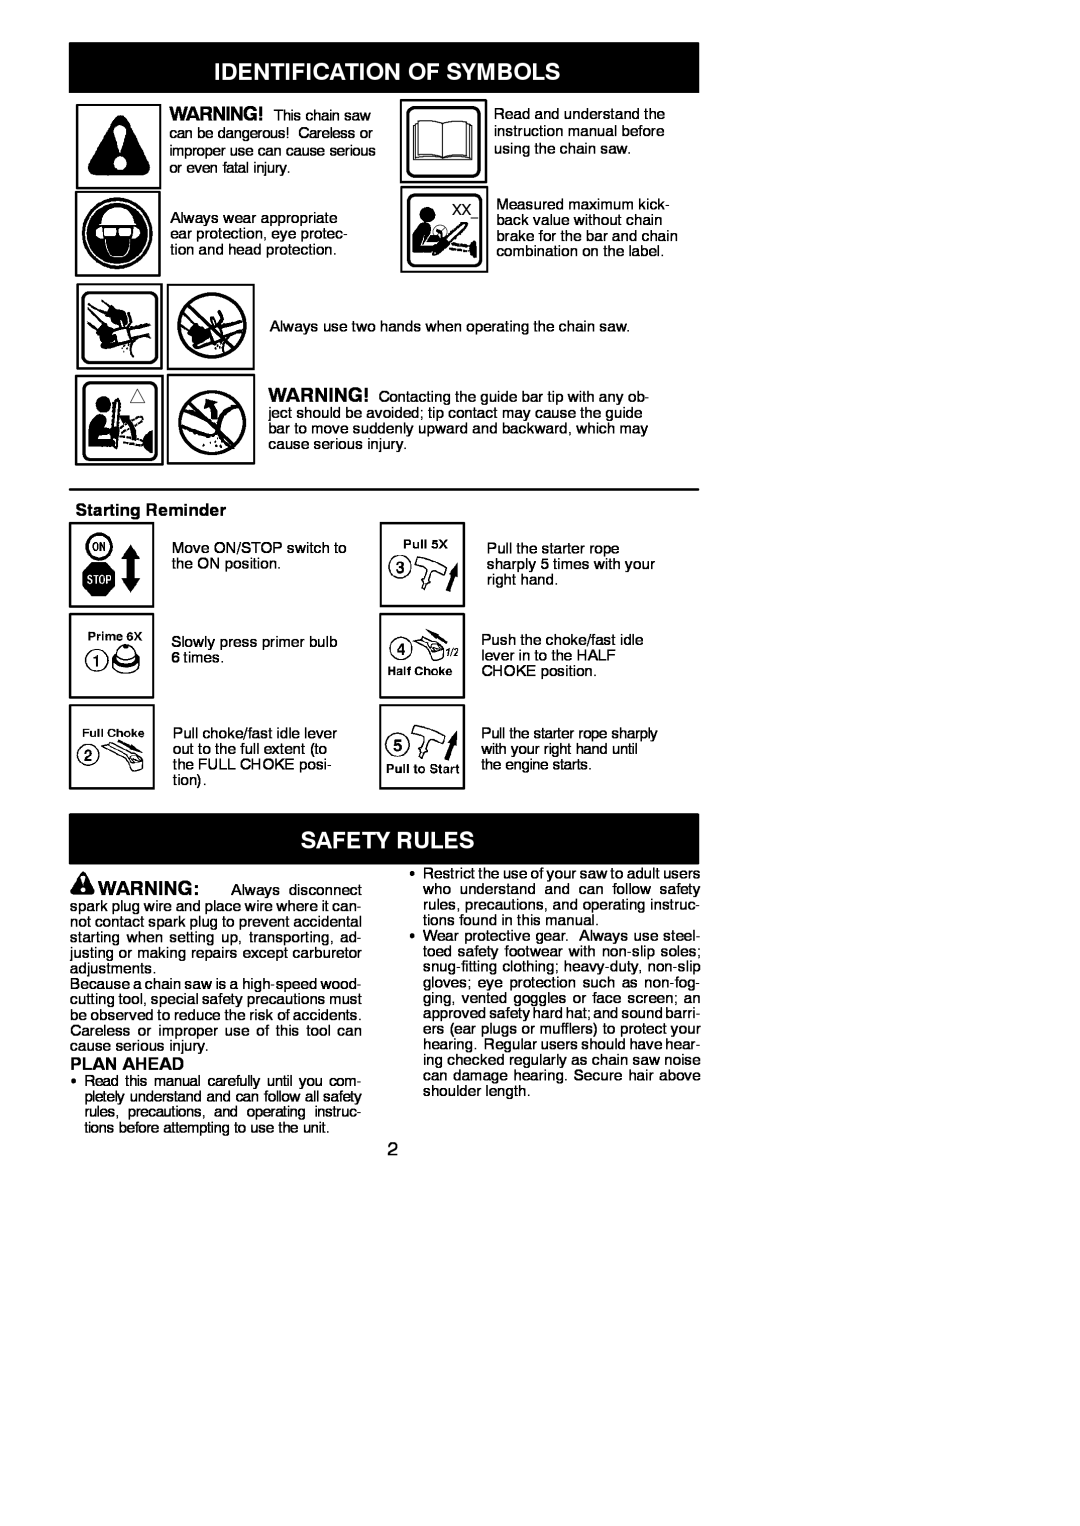 Poulan 545137234 instruction manual Identification Of Symbols, Safety Rules, Starting Reminder, Plan Ahead 